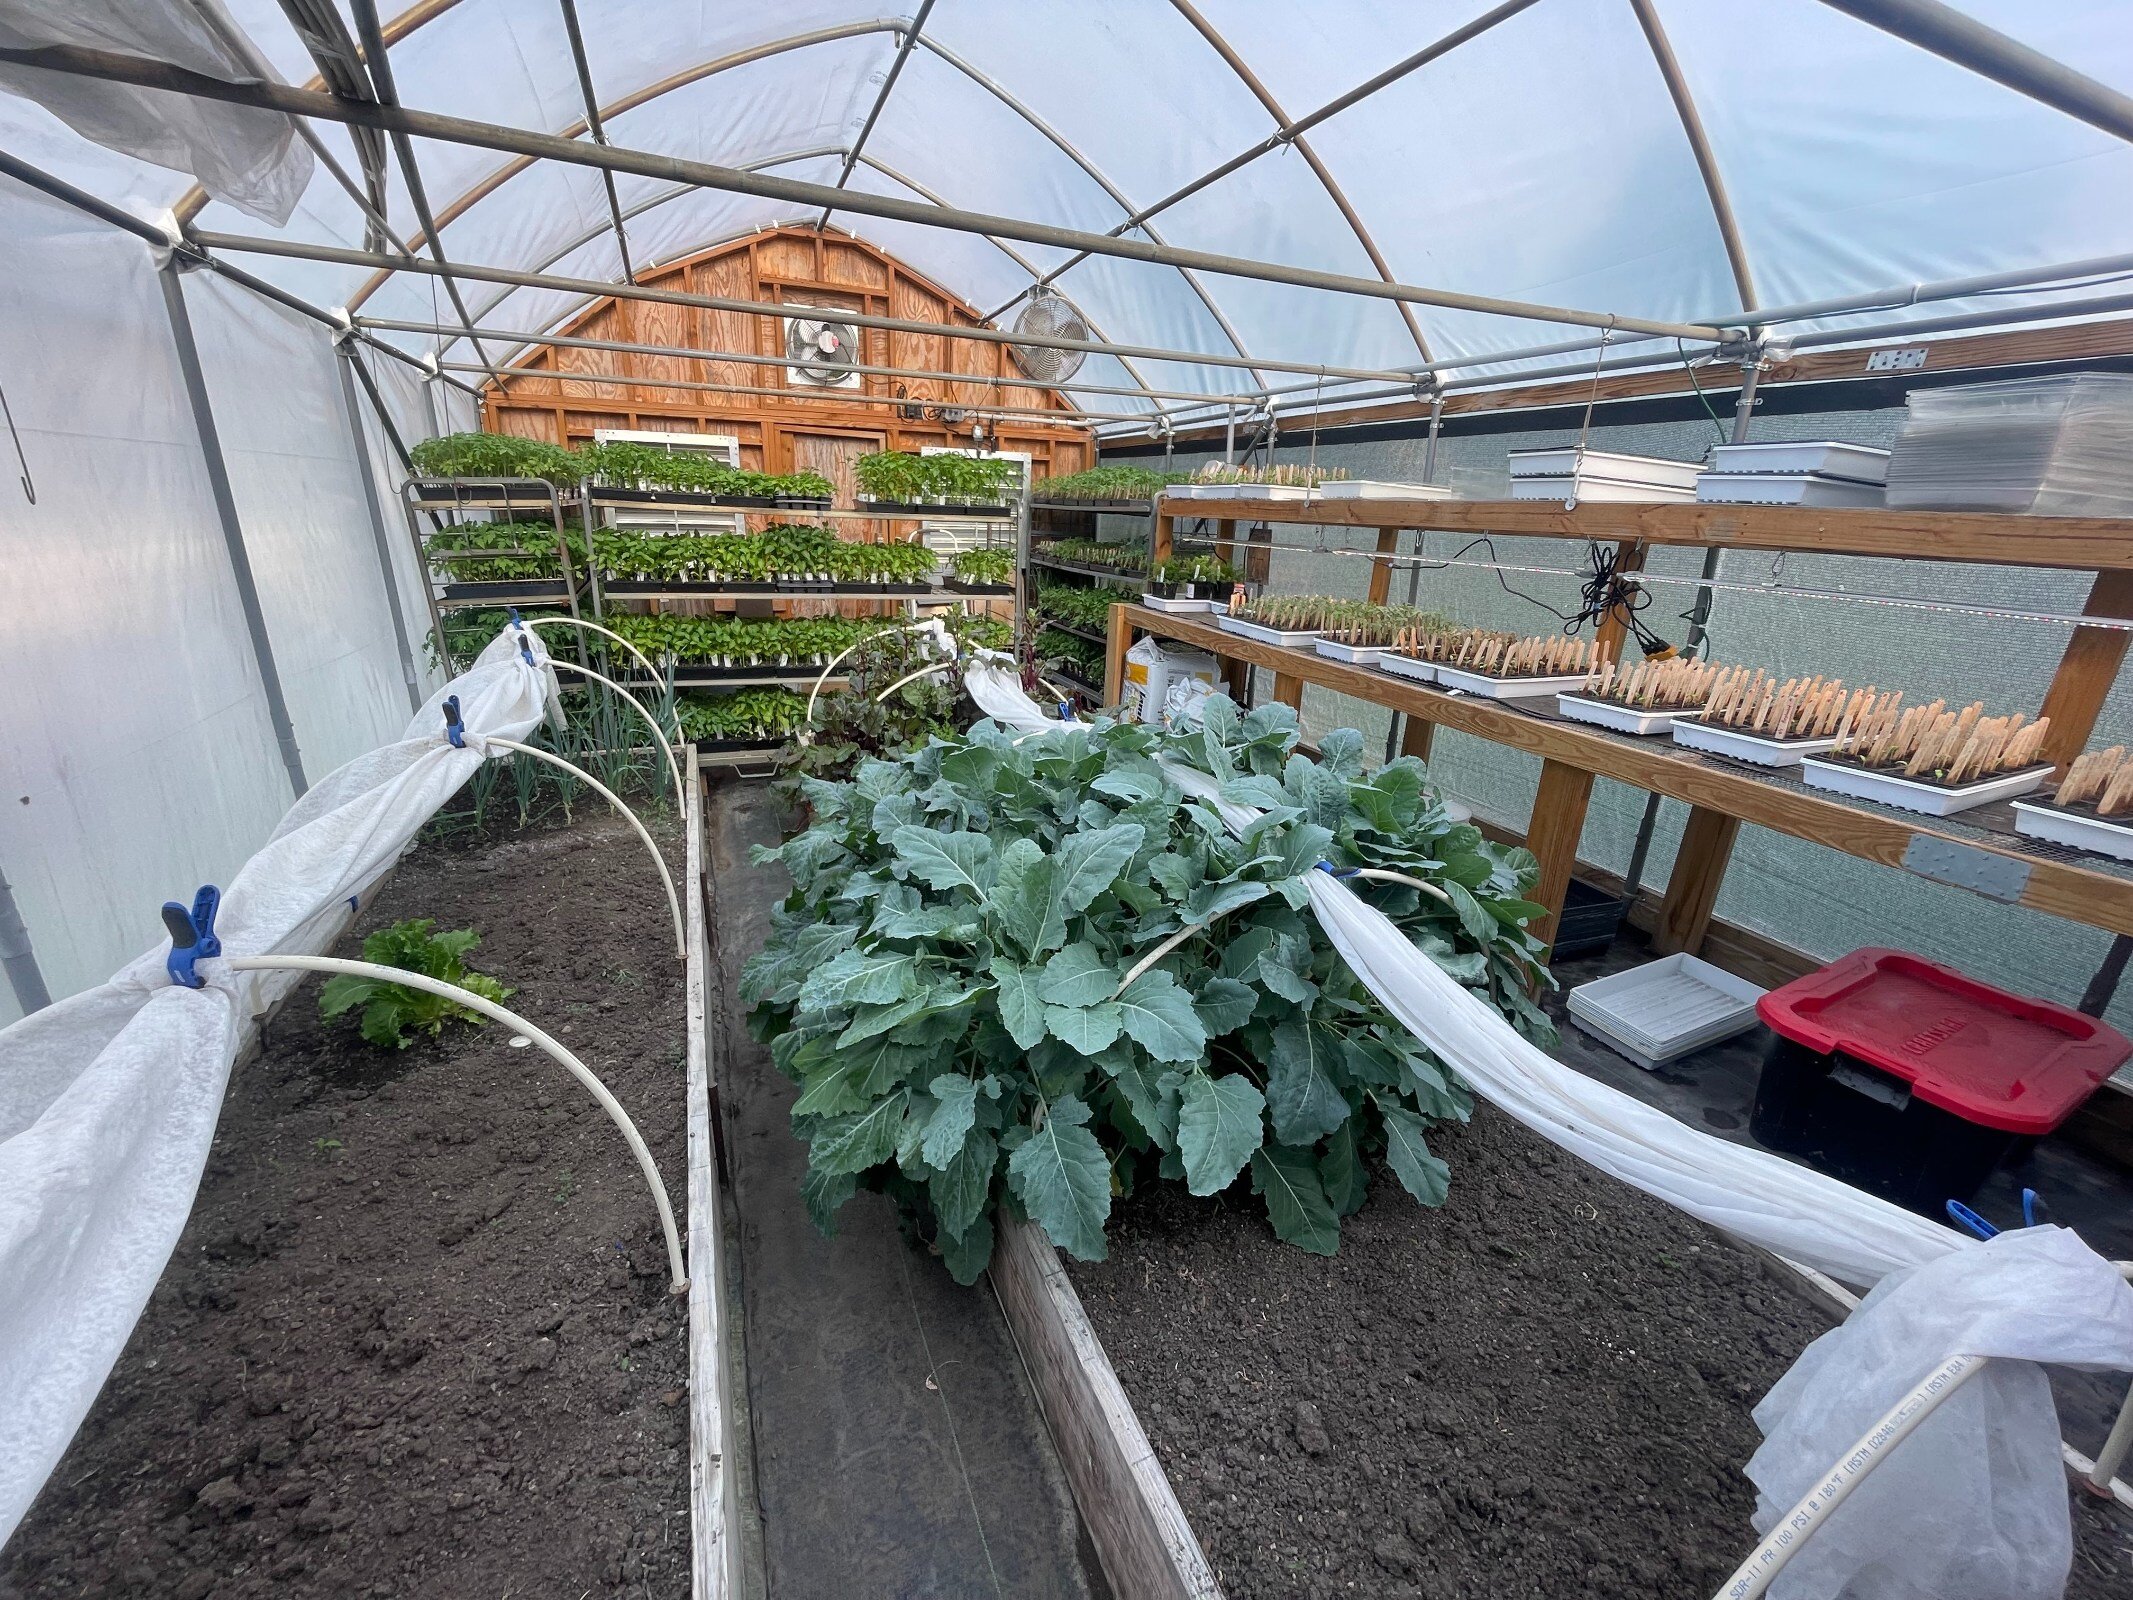 The garden complex also features a greenhouse, an herb garden and educational zone for visiting classes, a pollinator garden, and even a chicken farm for fresh eggs.